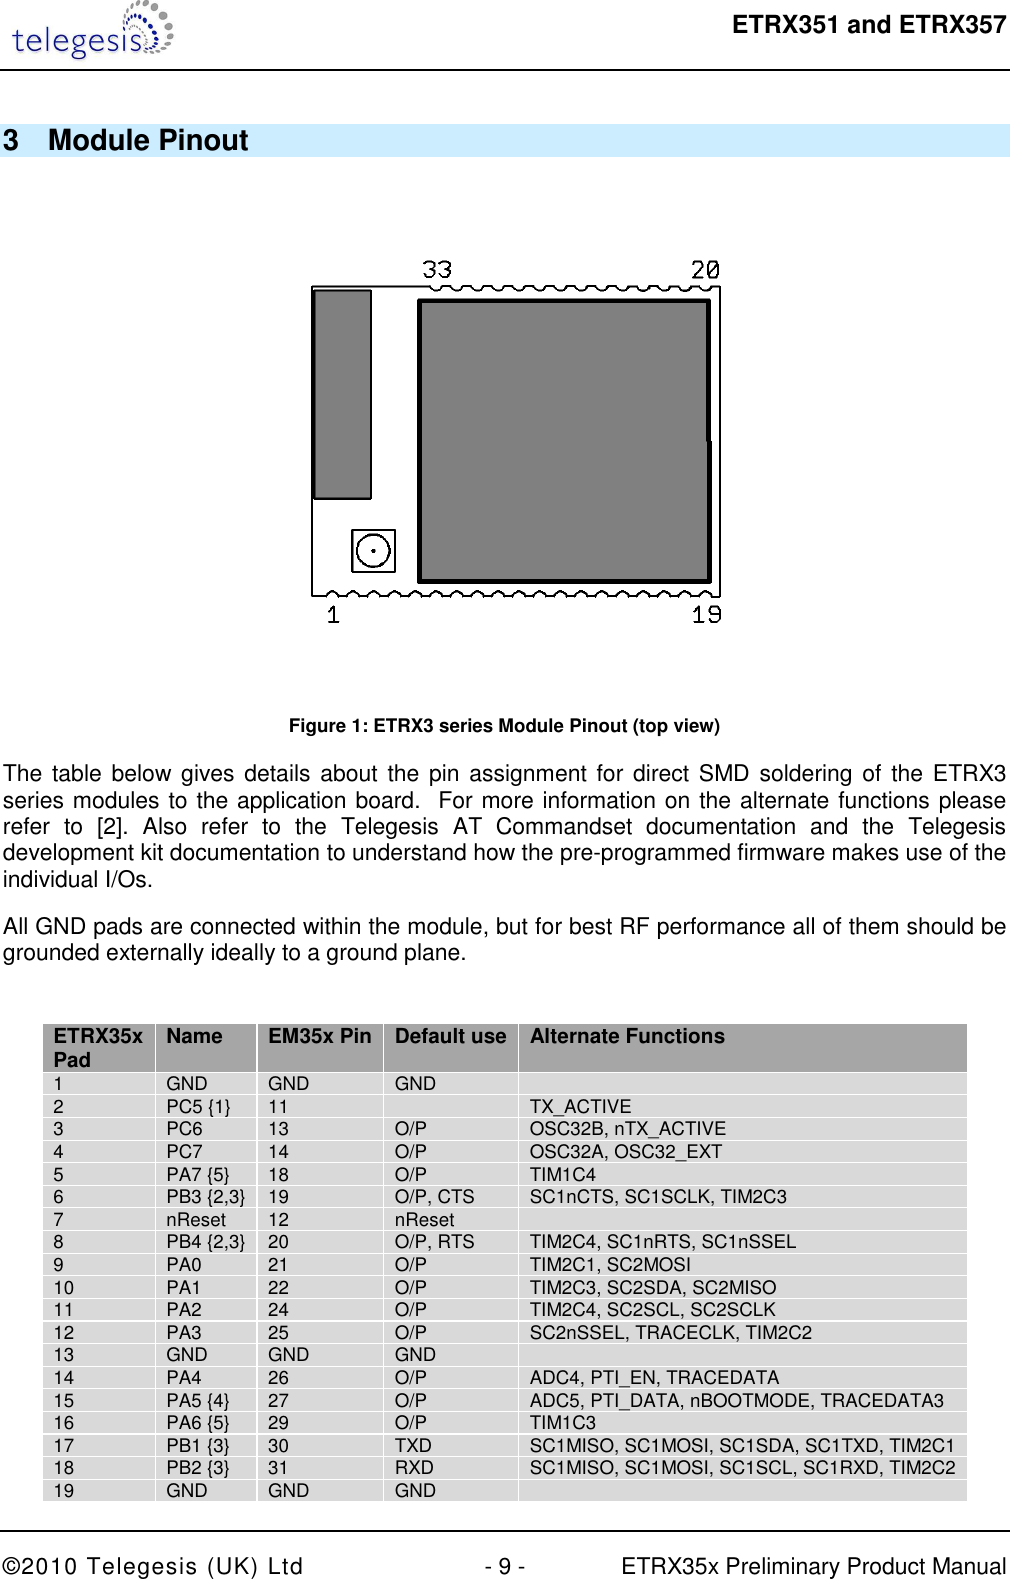  ETRX351 and ETRX357  ©2010 Telegesis (UK) Ltd  - 9 -  ETRX35x Preliminary Product Manual 3  Module Pinout  Figure 1: ETRX3 series Module Pinout (top view) The table below gives details about the pin assignment for direct SMD soldering of the ETRX3 series modules to the application board.  For more information on the alternate functions please refer  to  [2].  Also  refer  to  the  Telegesis  AT  Commandset  documentation  and  the  Telegesis development kit documentation to understand how the pre-programmed firmware makes use of the individual I/Os. All GND pads are connected within the module, but for best RF performance all of them should be grounded externally ideally to a ground plane.   ETRX35x Pad  Name  EM35x Pin Default use Alternate Functions 1  GND  GND  GND   2  PC5 {1}  11    TX_ACTIVE  3  PC6  13  O/P  OSC32B, nTX_ACTIVE 4  PC7  14  O/P  OSC32A, OSC32_EXT 5  PA7 {5}  18  O/P  TIM1C4 6  PB3 {2,3}  19  O/P, CTS  SC1nCTS, SC1SCLK, TIM2C3 7  nReset  12  nReset   8  PB4 {2,3}  20  O/P, RTS  TIM2C4, SC1nRTS, SC1nSSEL 9  PA0  21  O/P  TIM2C1, SC2MOSI 10  PA1  22  O/P  TIM2C3, SC2SDA, SC2MISO 11  PA2  24  O/P  TIM2C4, SC2SCL, SC2SCLK 12  PA3  25  O/P  SC2nSSEL, TRACECLK, TIM2C2 13  GND  GND  GND   14  PA4  26  O/P  ADC4, PTI_EN, TRACEDATA 15  PA5 {4}  27  O/P  ADC5, PTI_DATA, nBOOTMODE, TRACEDATA3 16  PA6 {5}  29  O/P  TIM1C3 17  PB1 {3}  30  TXD  SC1MISO, SC1MOSI, SC1SDA, SC1TXD, TIM2C1 18  PB2 {3}  31  RXD  SC1MISO, SC1MOSI, SC1SCL, SC1RXD, TIM2C2 19  GND  GND  GND   